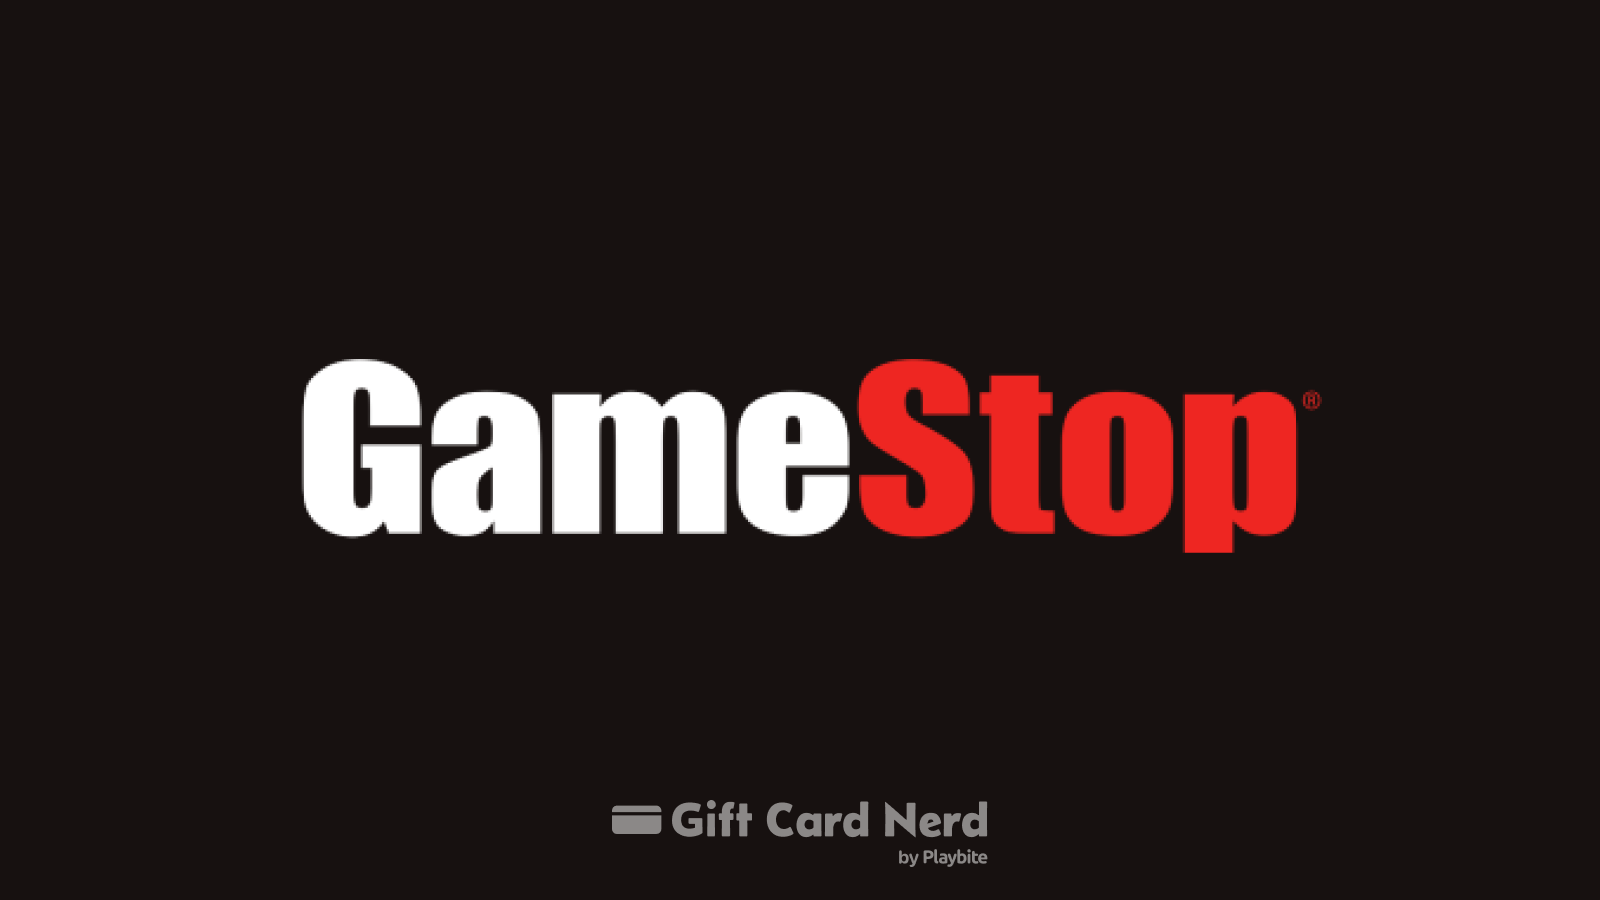 Can I Use a Game Stop Gift Card on Paypal?